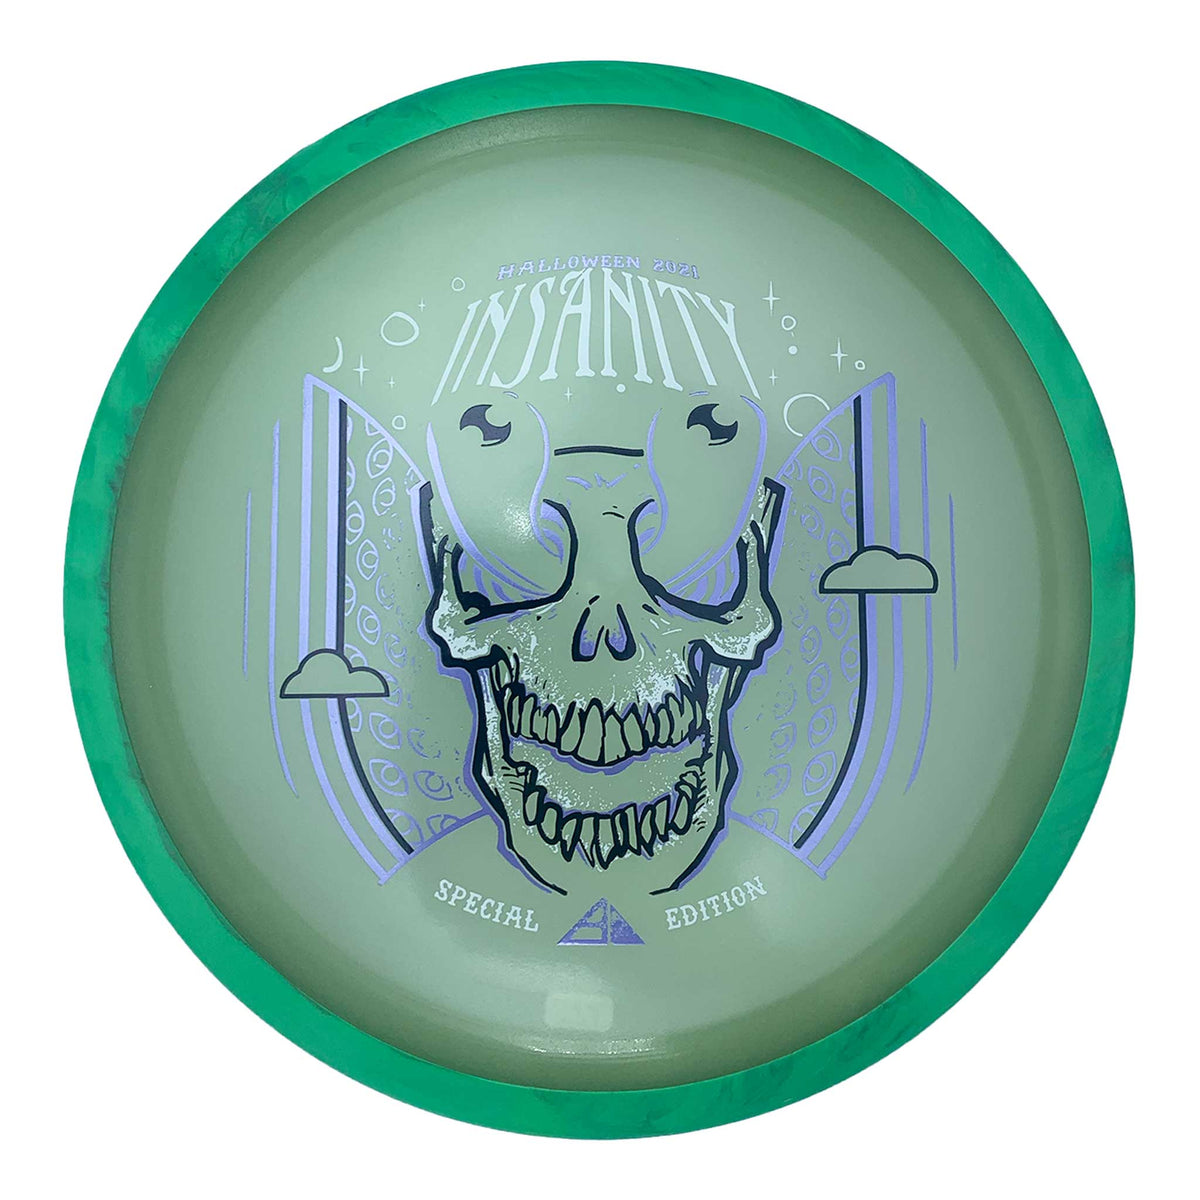 Axiom Discs Eclipse 2.0 Glow Insanity Halloween 2021 Special Edition distance driver - Green Swirls